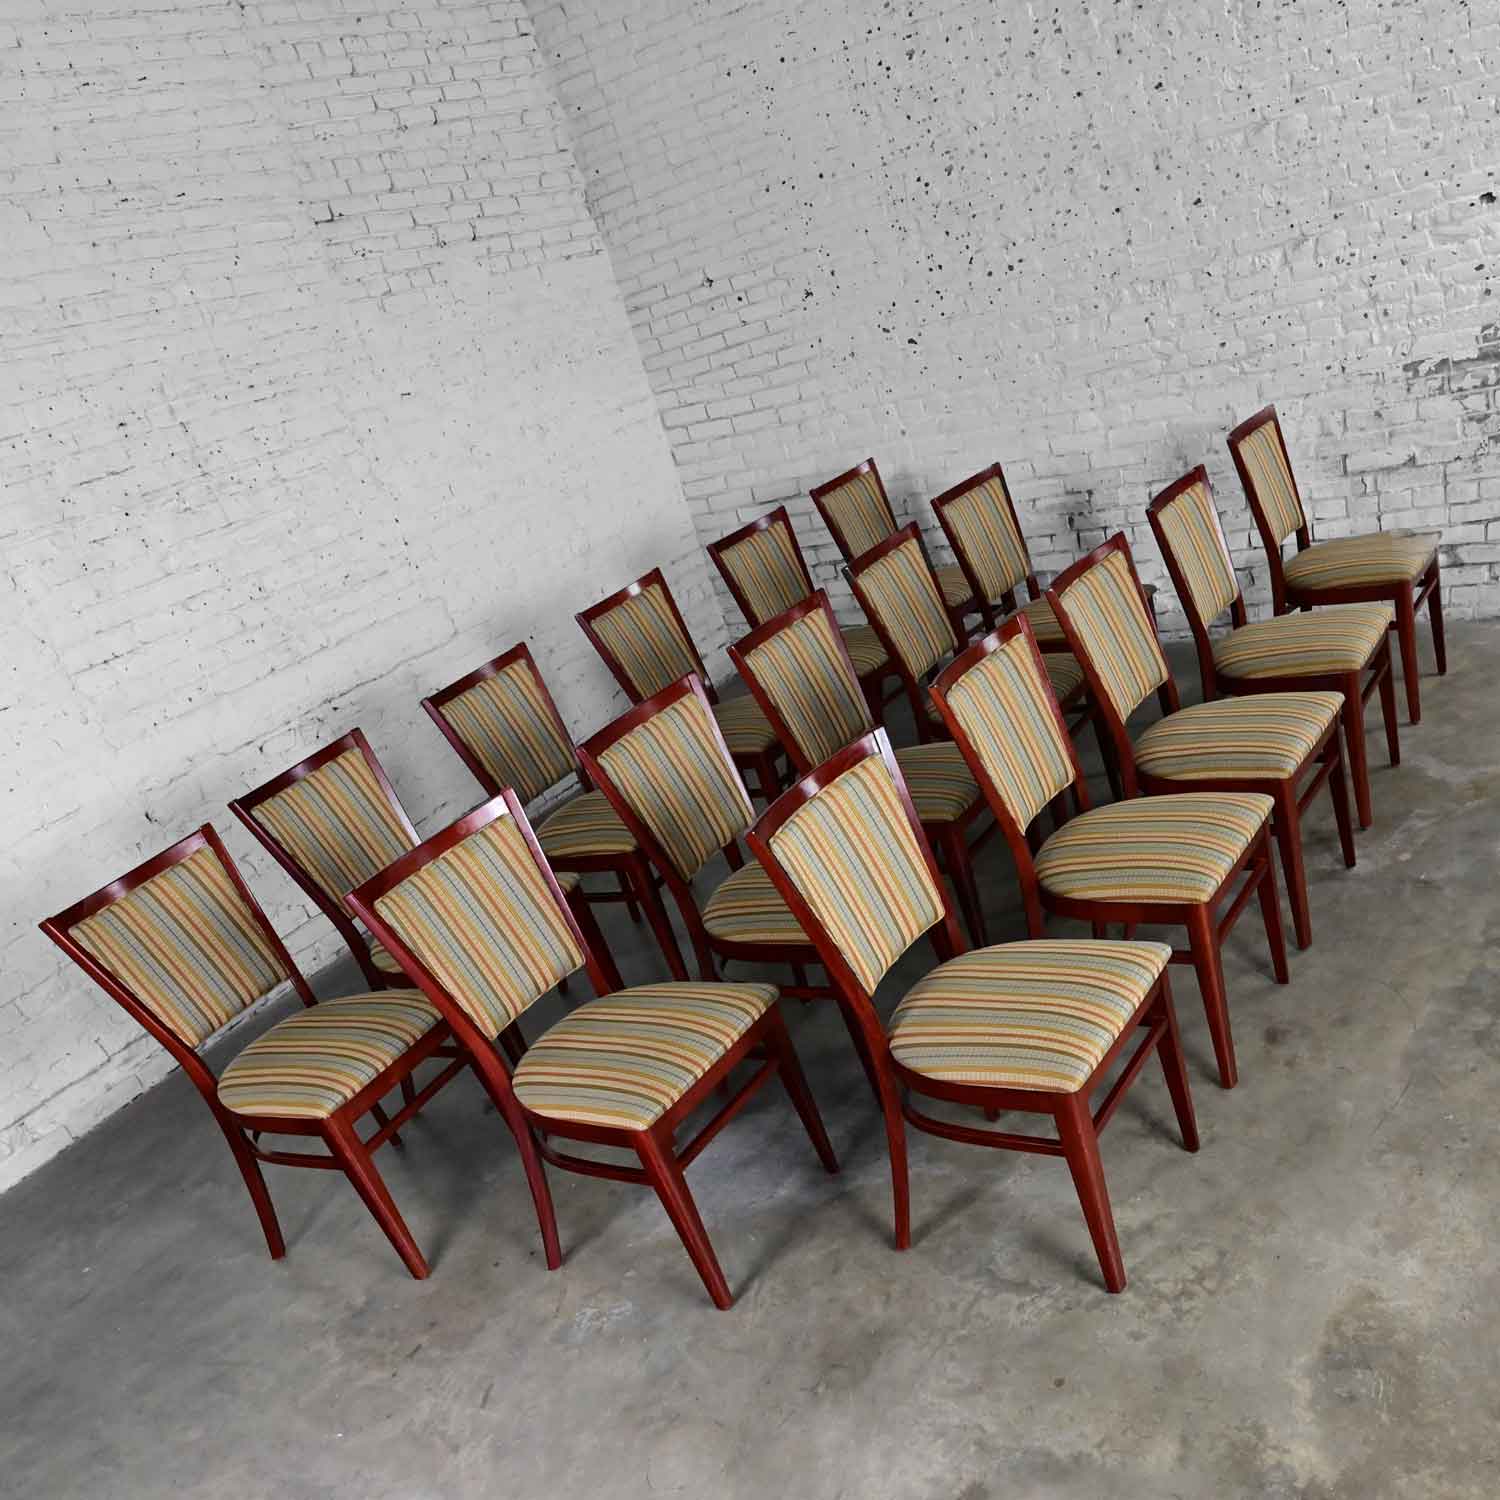 Early 21st Century Modern Grand Rapids Chair Co Variations Collection Dining Chairs Selling Separately